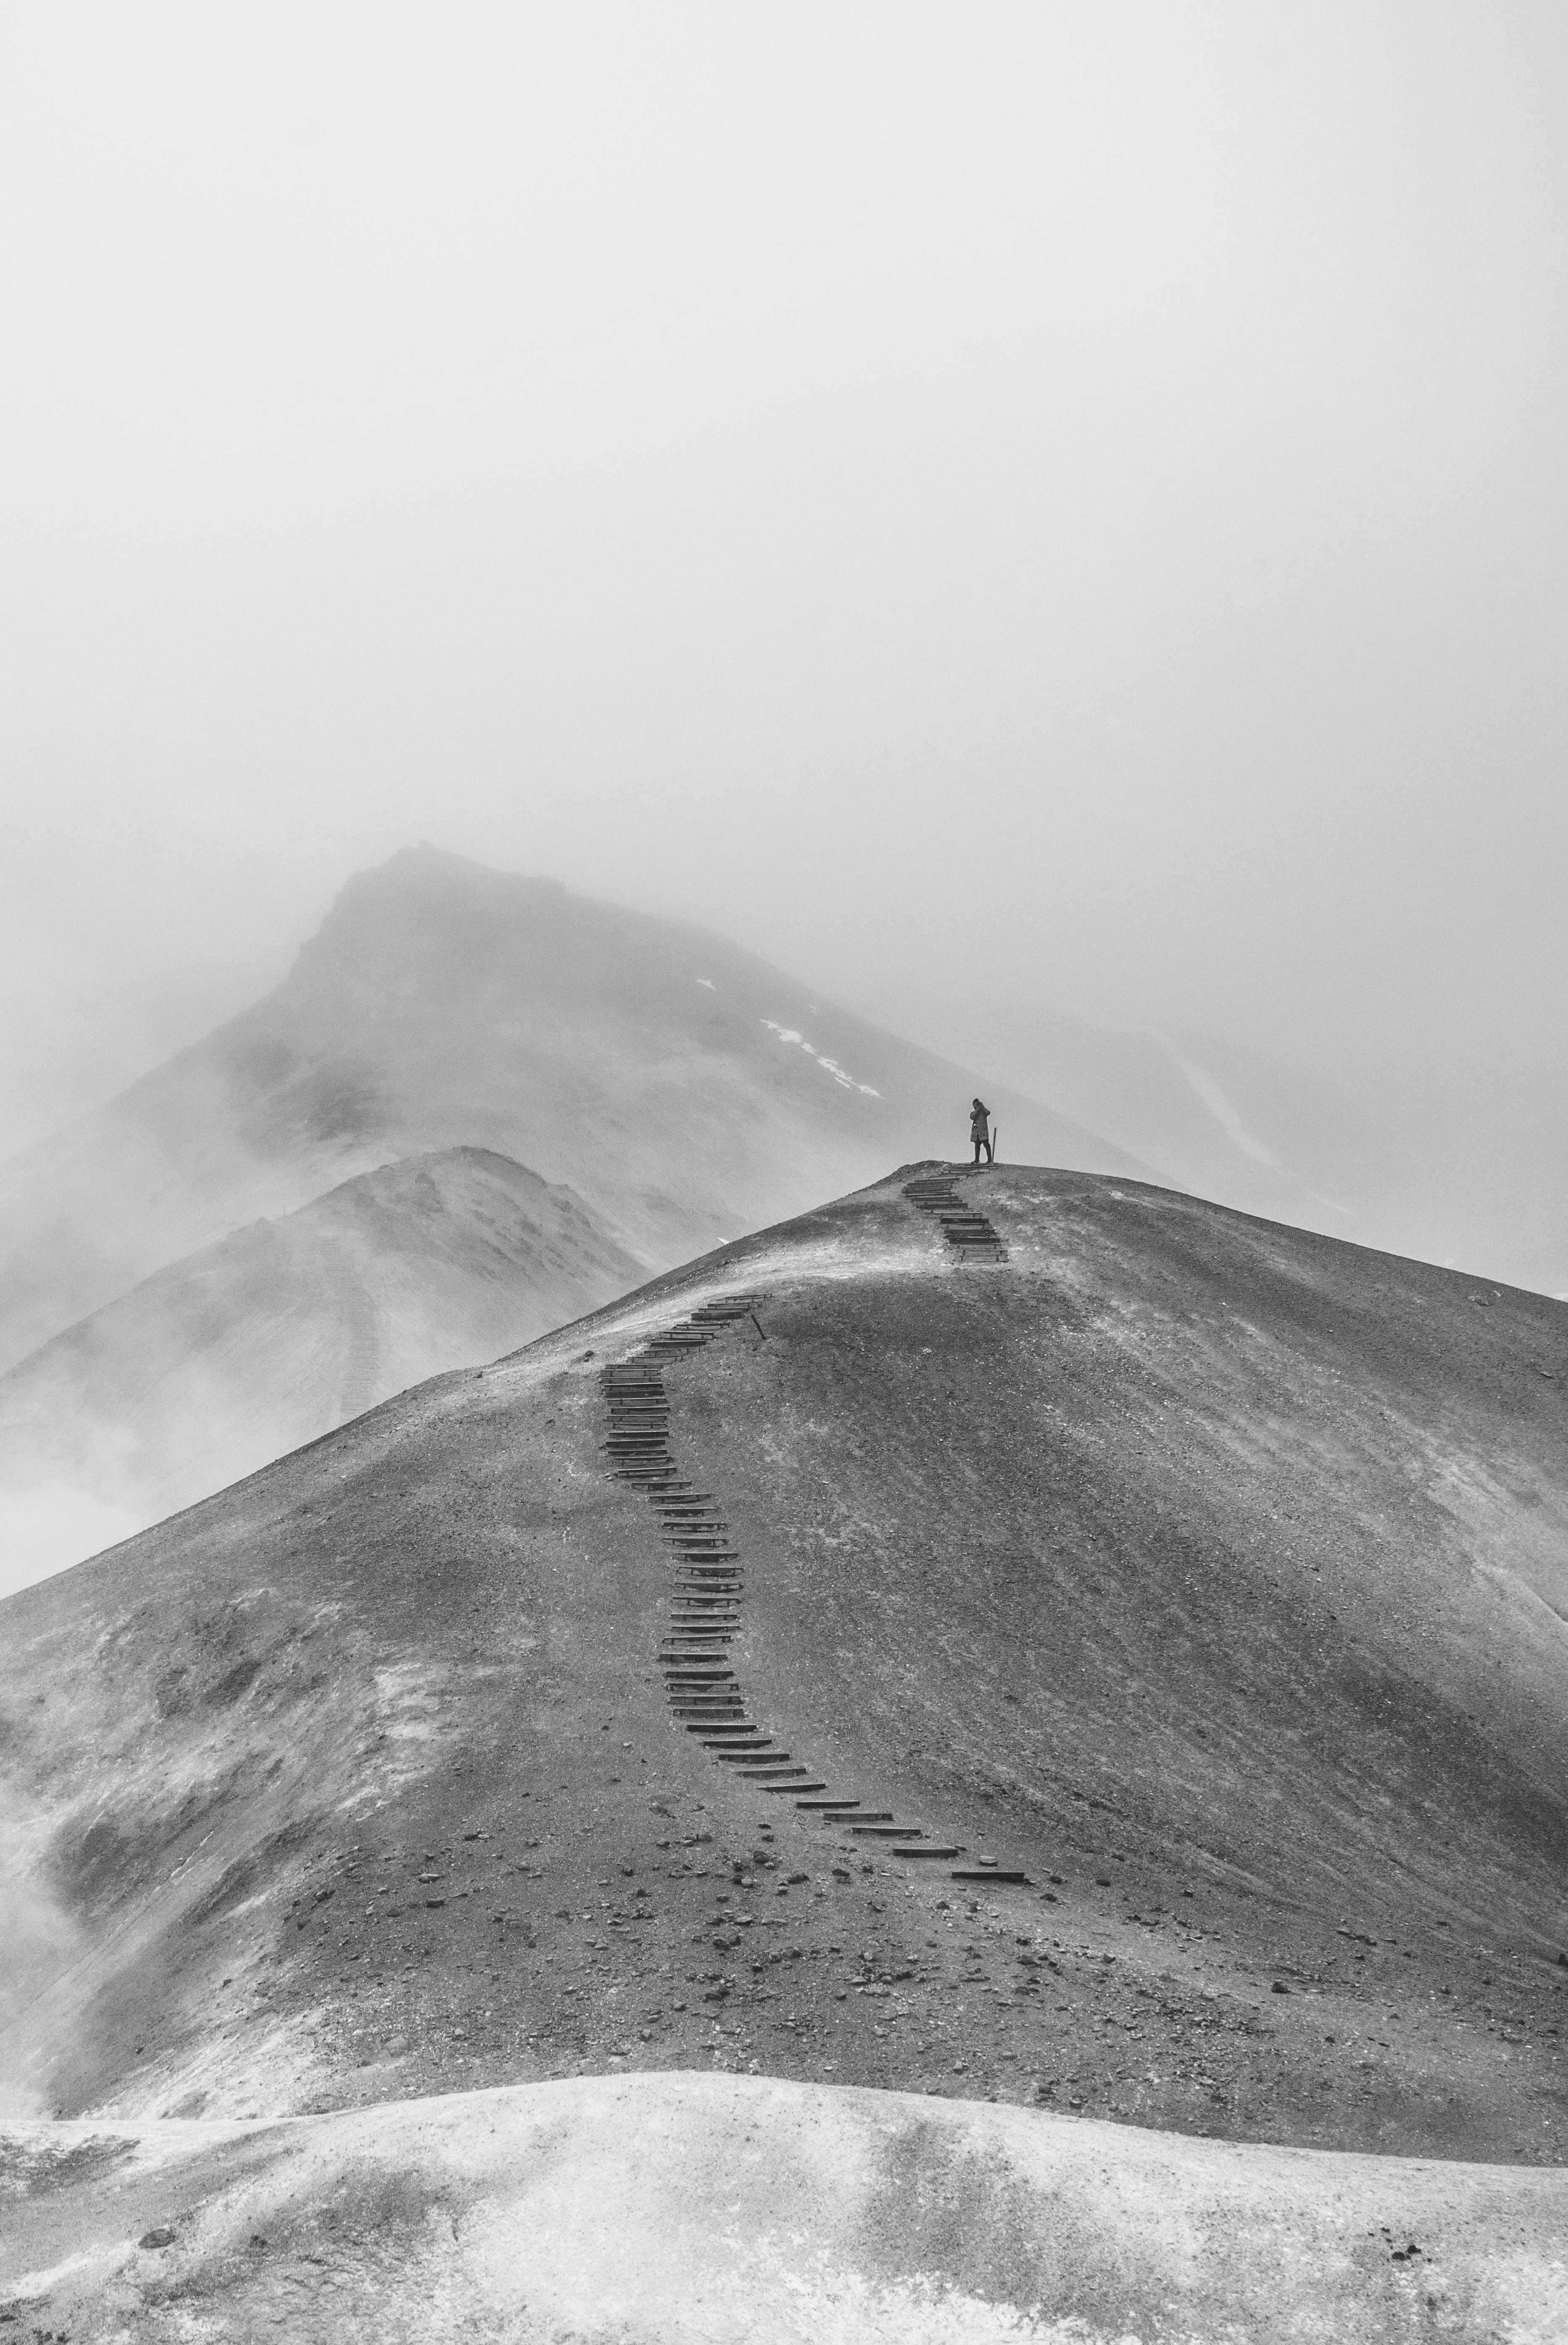 Background image of person walking up path on a mountain